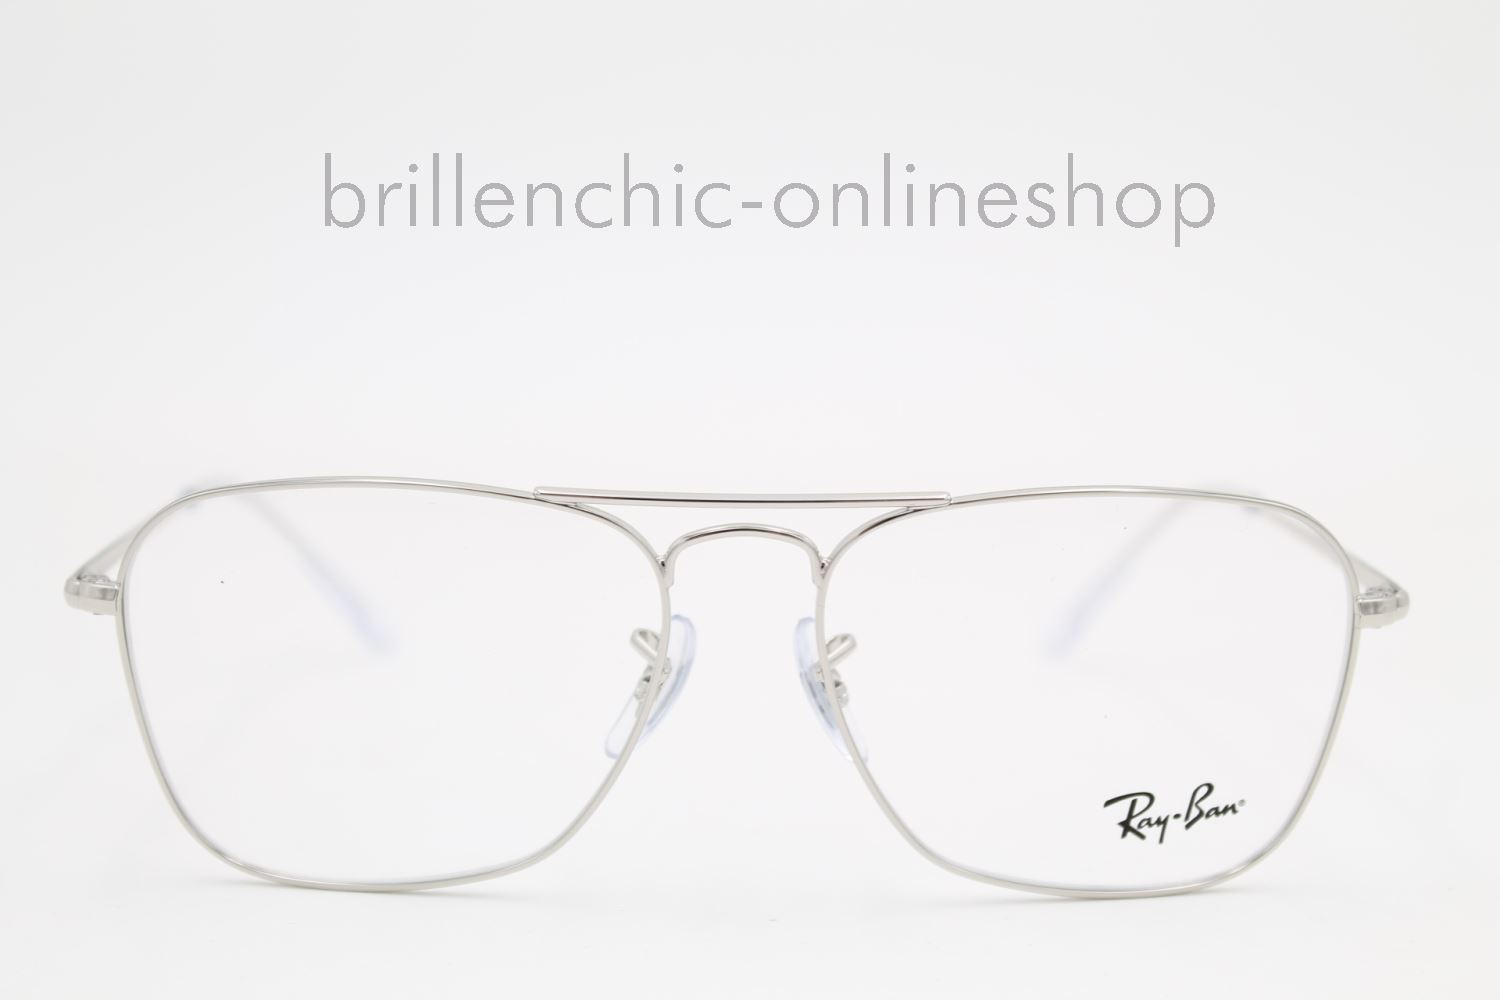 Brillenchic-onlineshop in Berlin - Ray Ban RB 6536 2501 